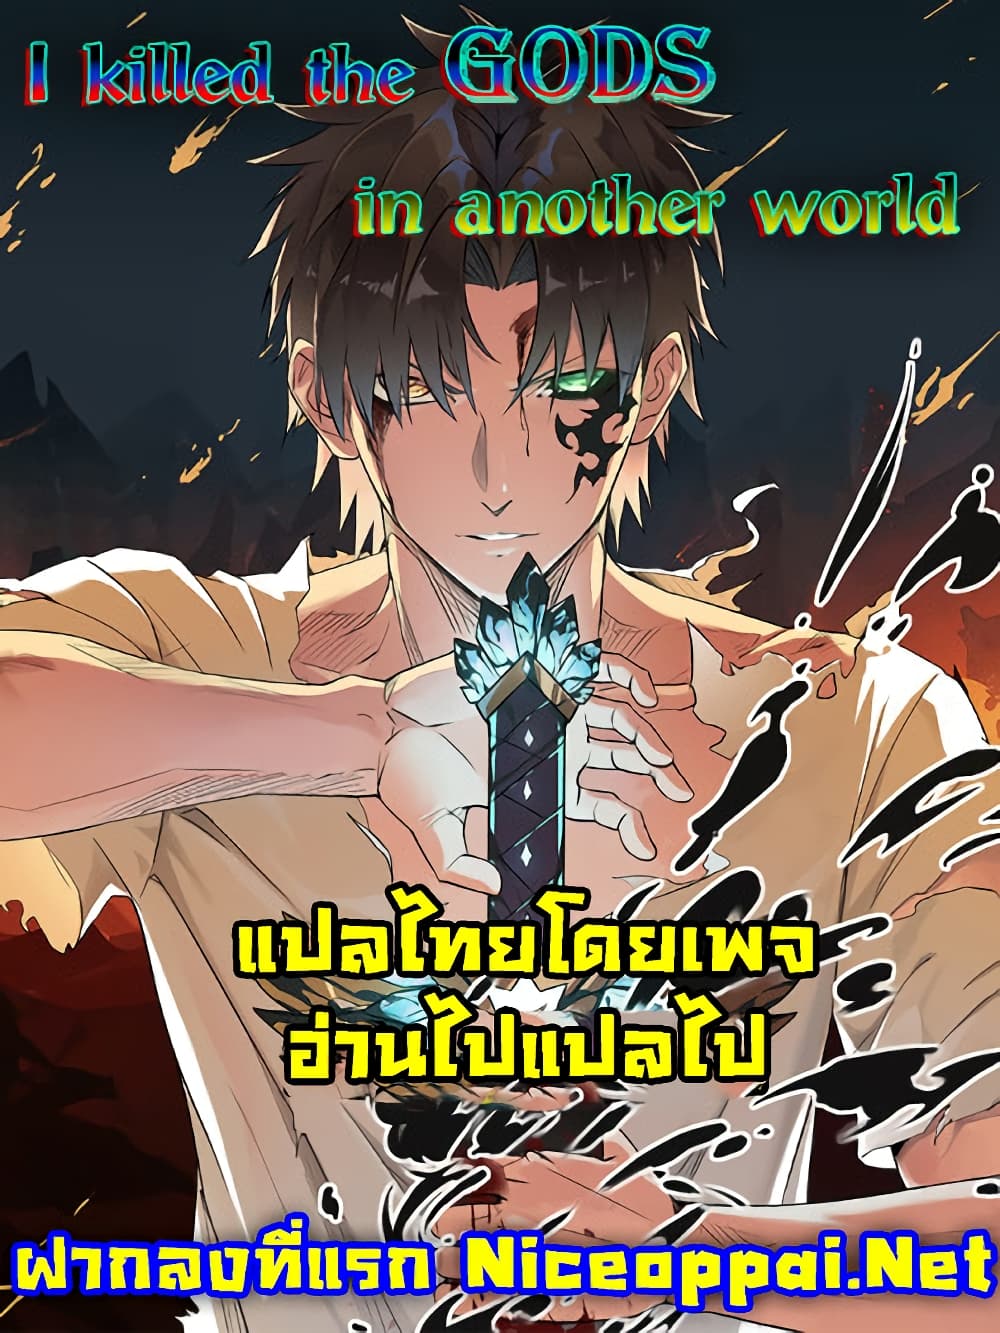 I Killed The Gods in Another World 8 (1)